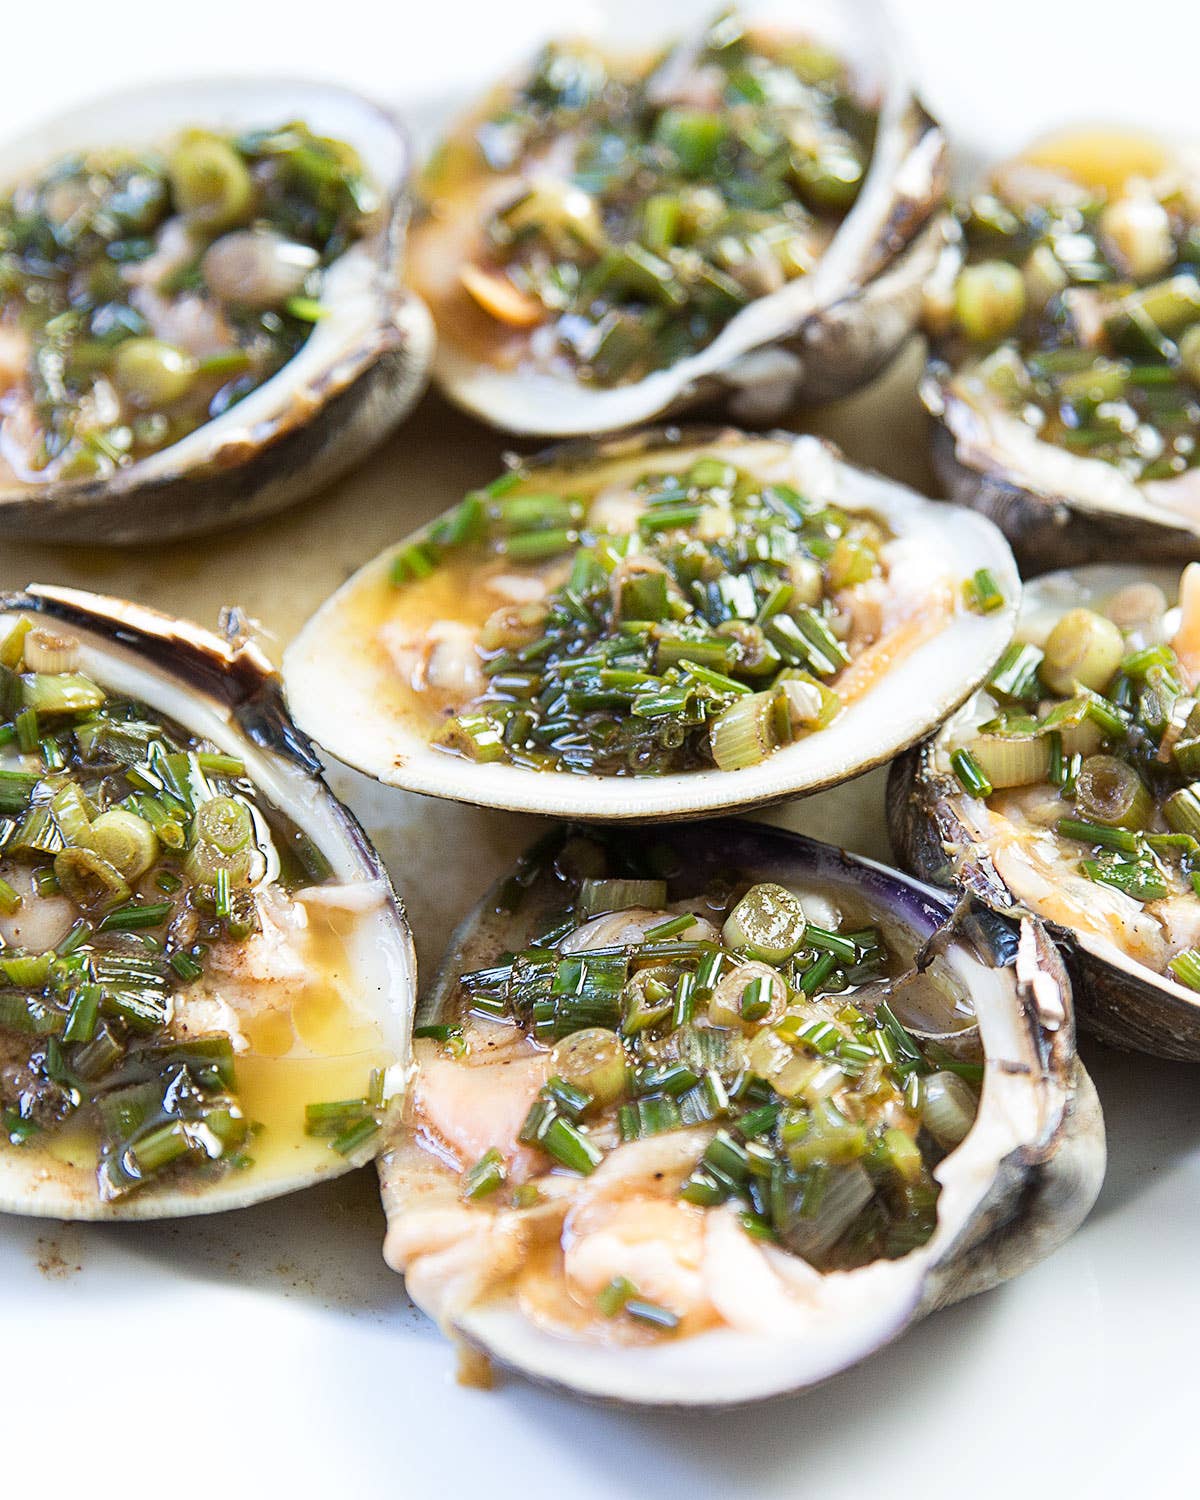 Jacques Pépin’s Trick for Shucking Clams Without the Hassle